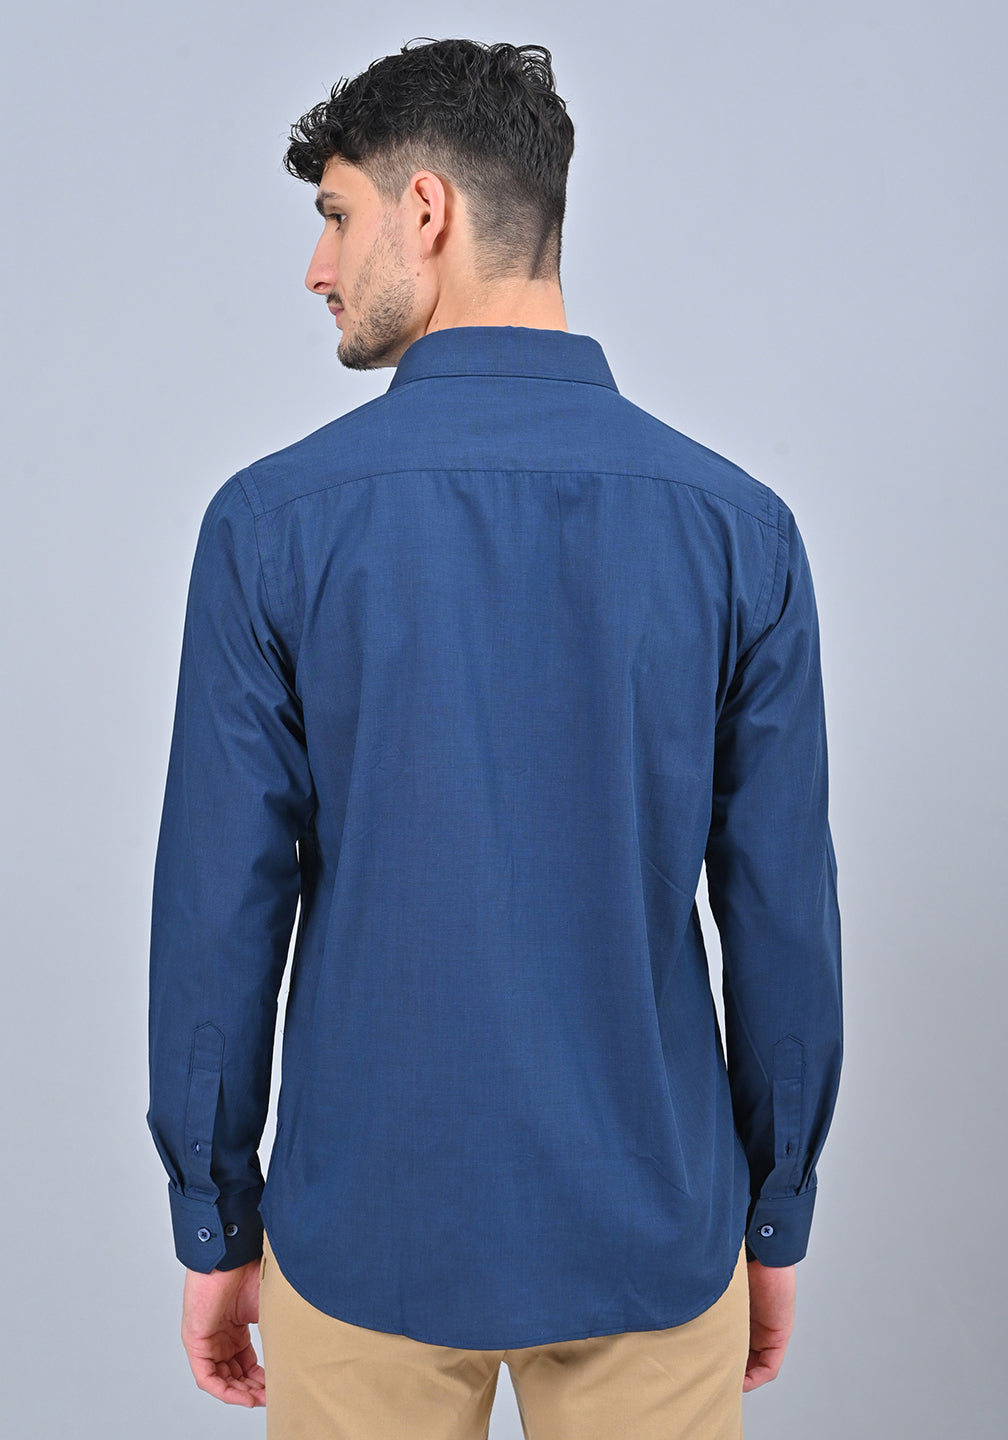 Navy Blue Colour Solid Formal shirt